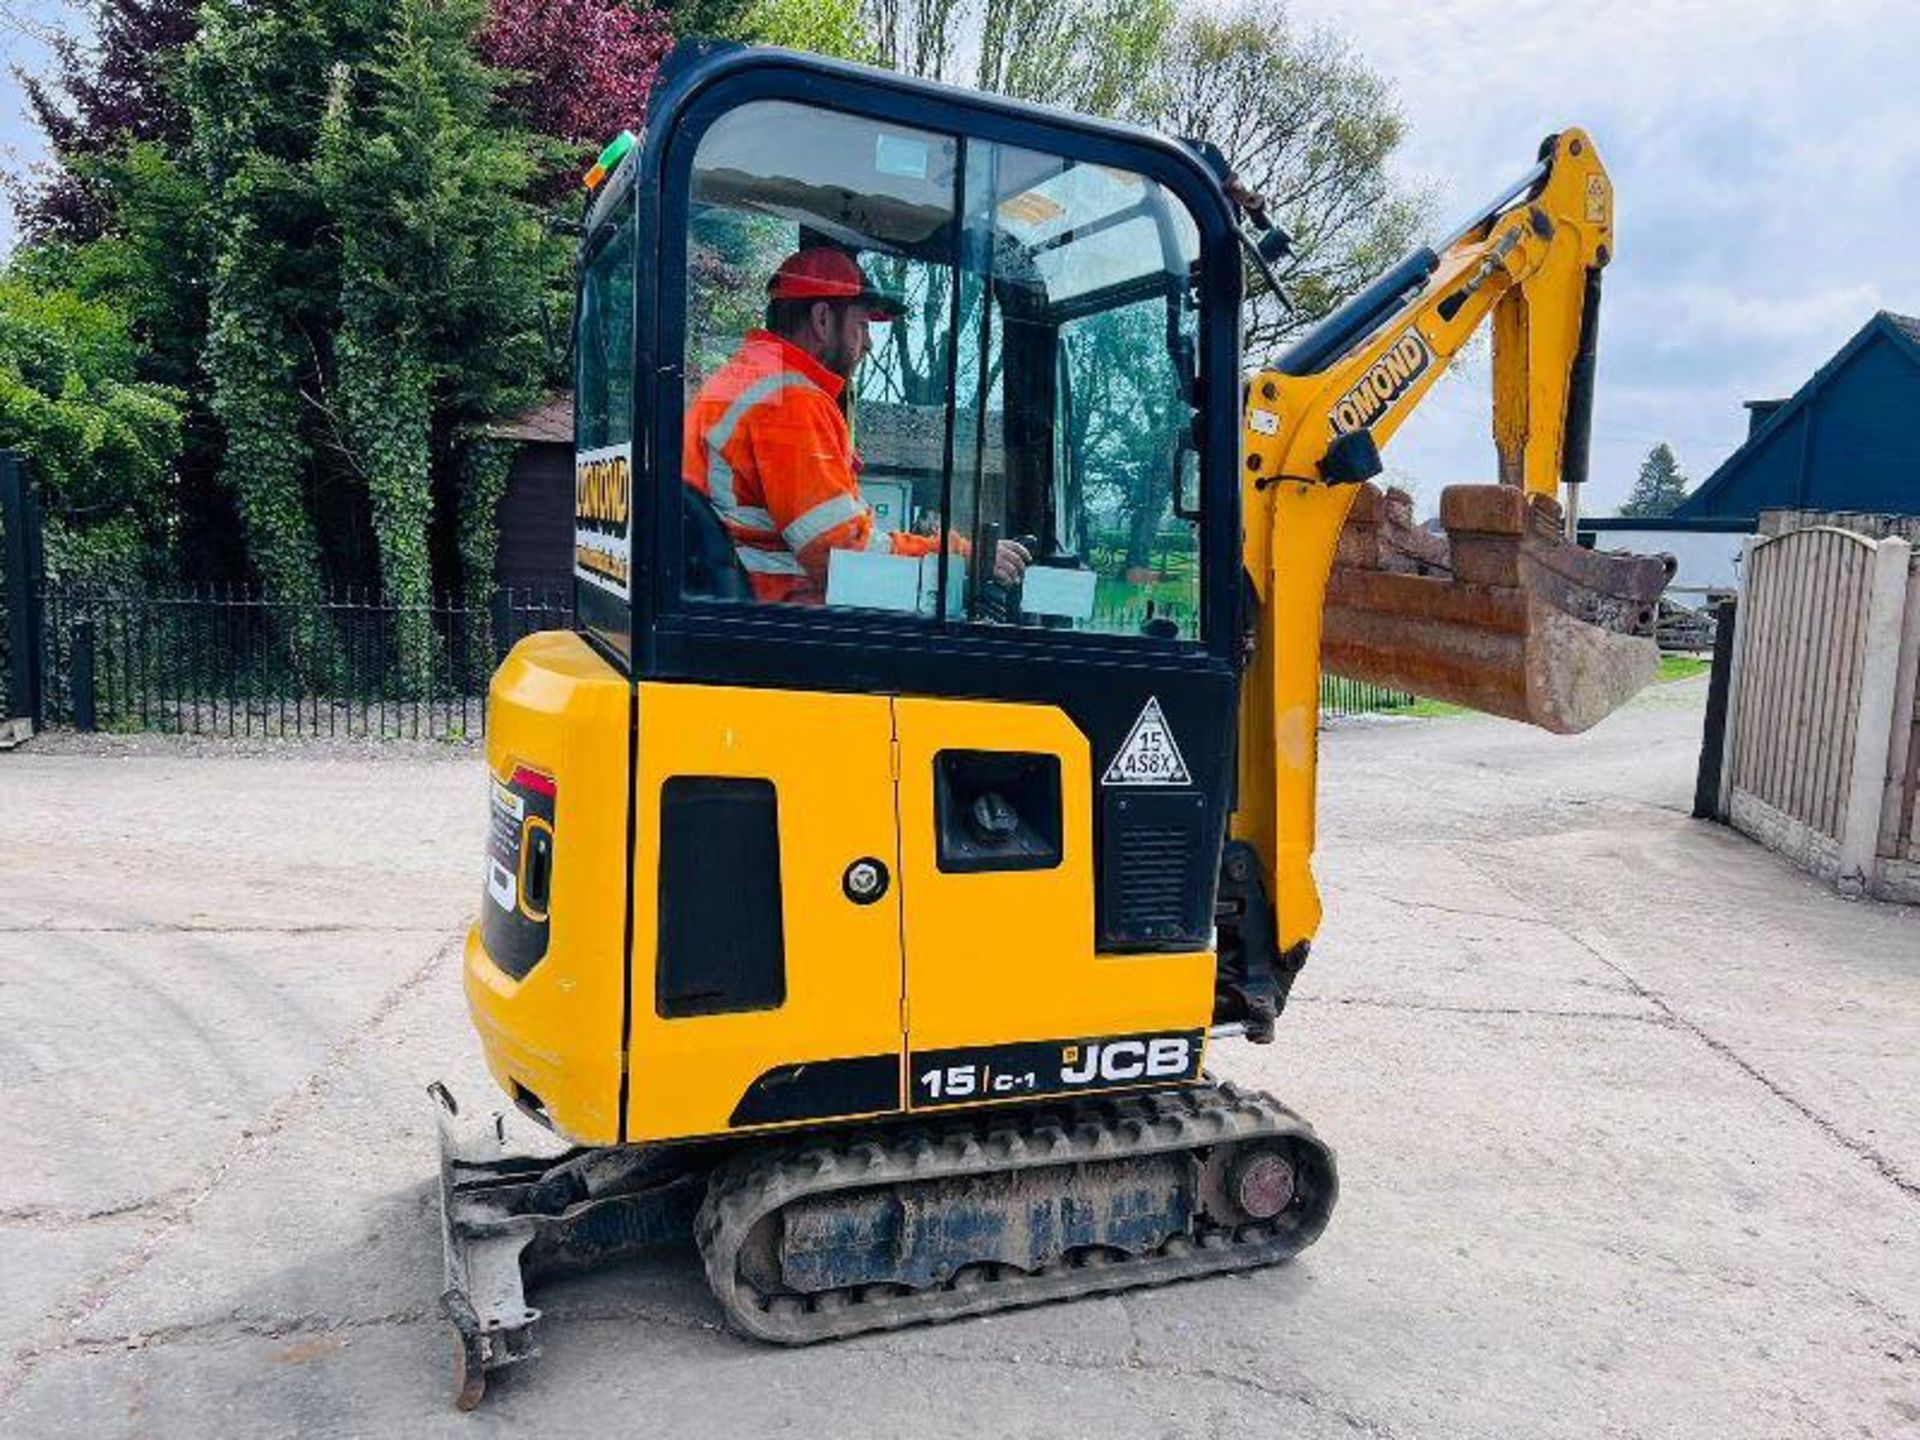 JCB 15 TRACKED EXCAVATOR *YEAR 2018 , CHOICE OF 2* C/W 3 X BUCKETS - Image 5 of 19